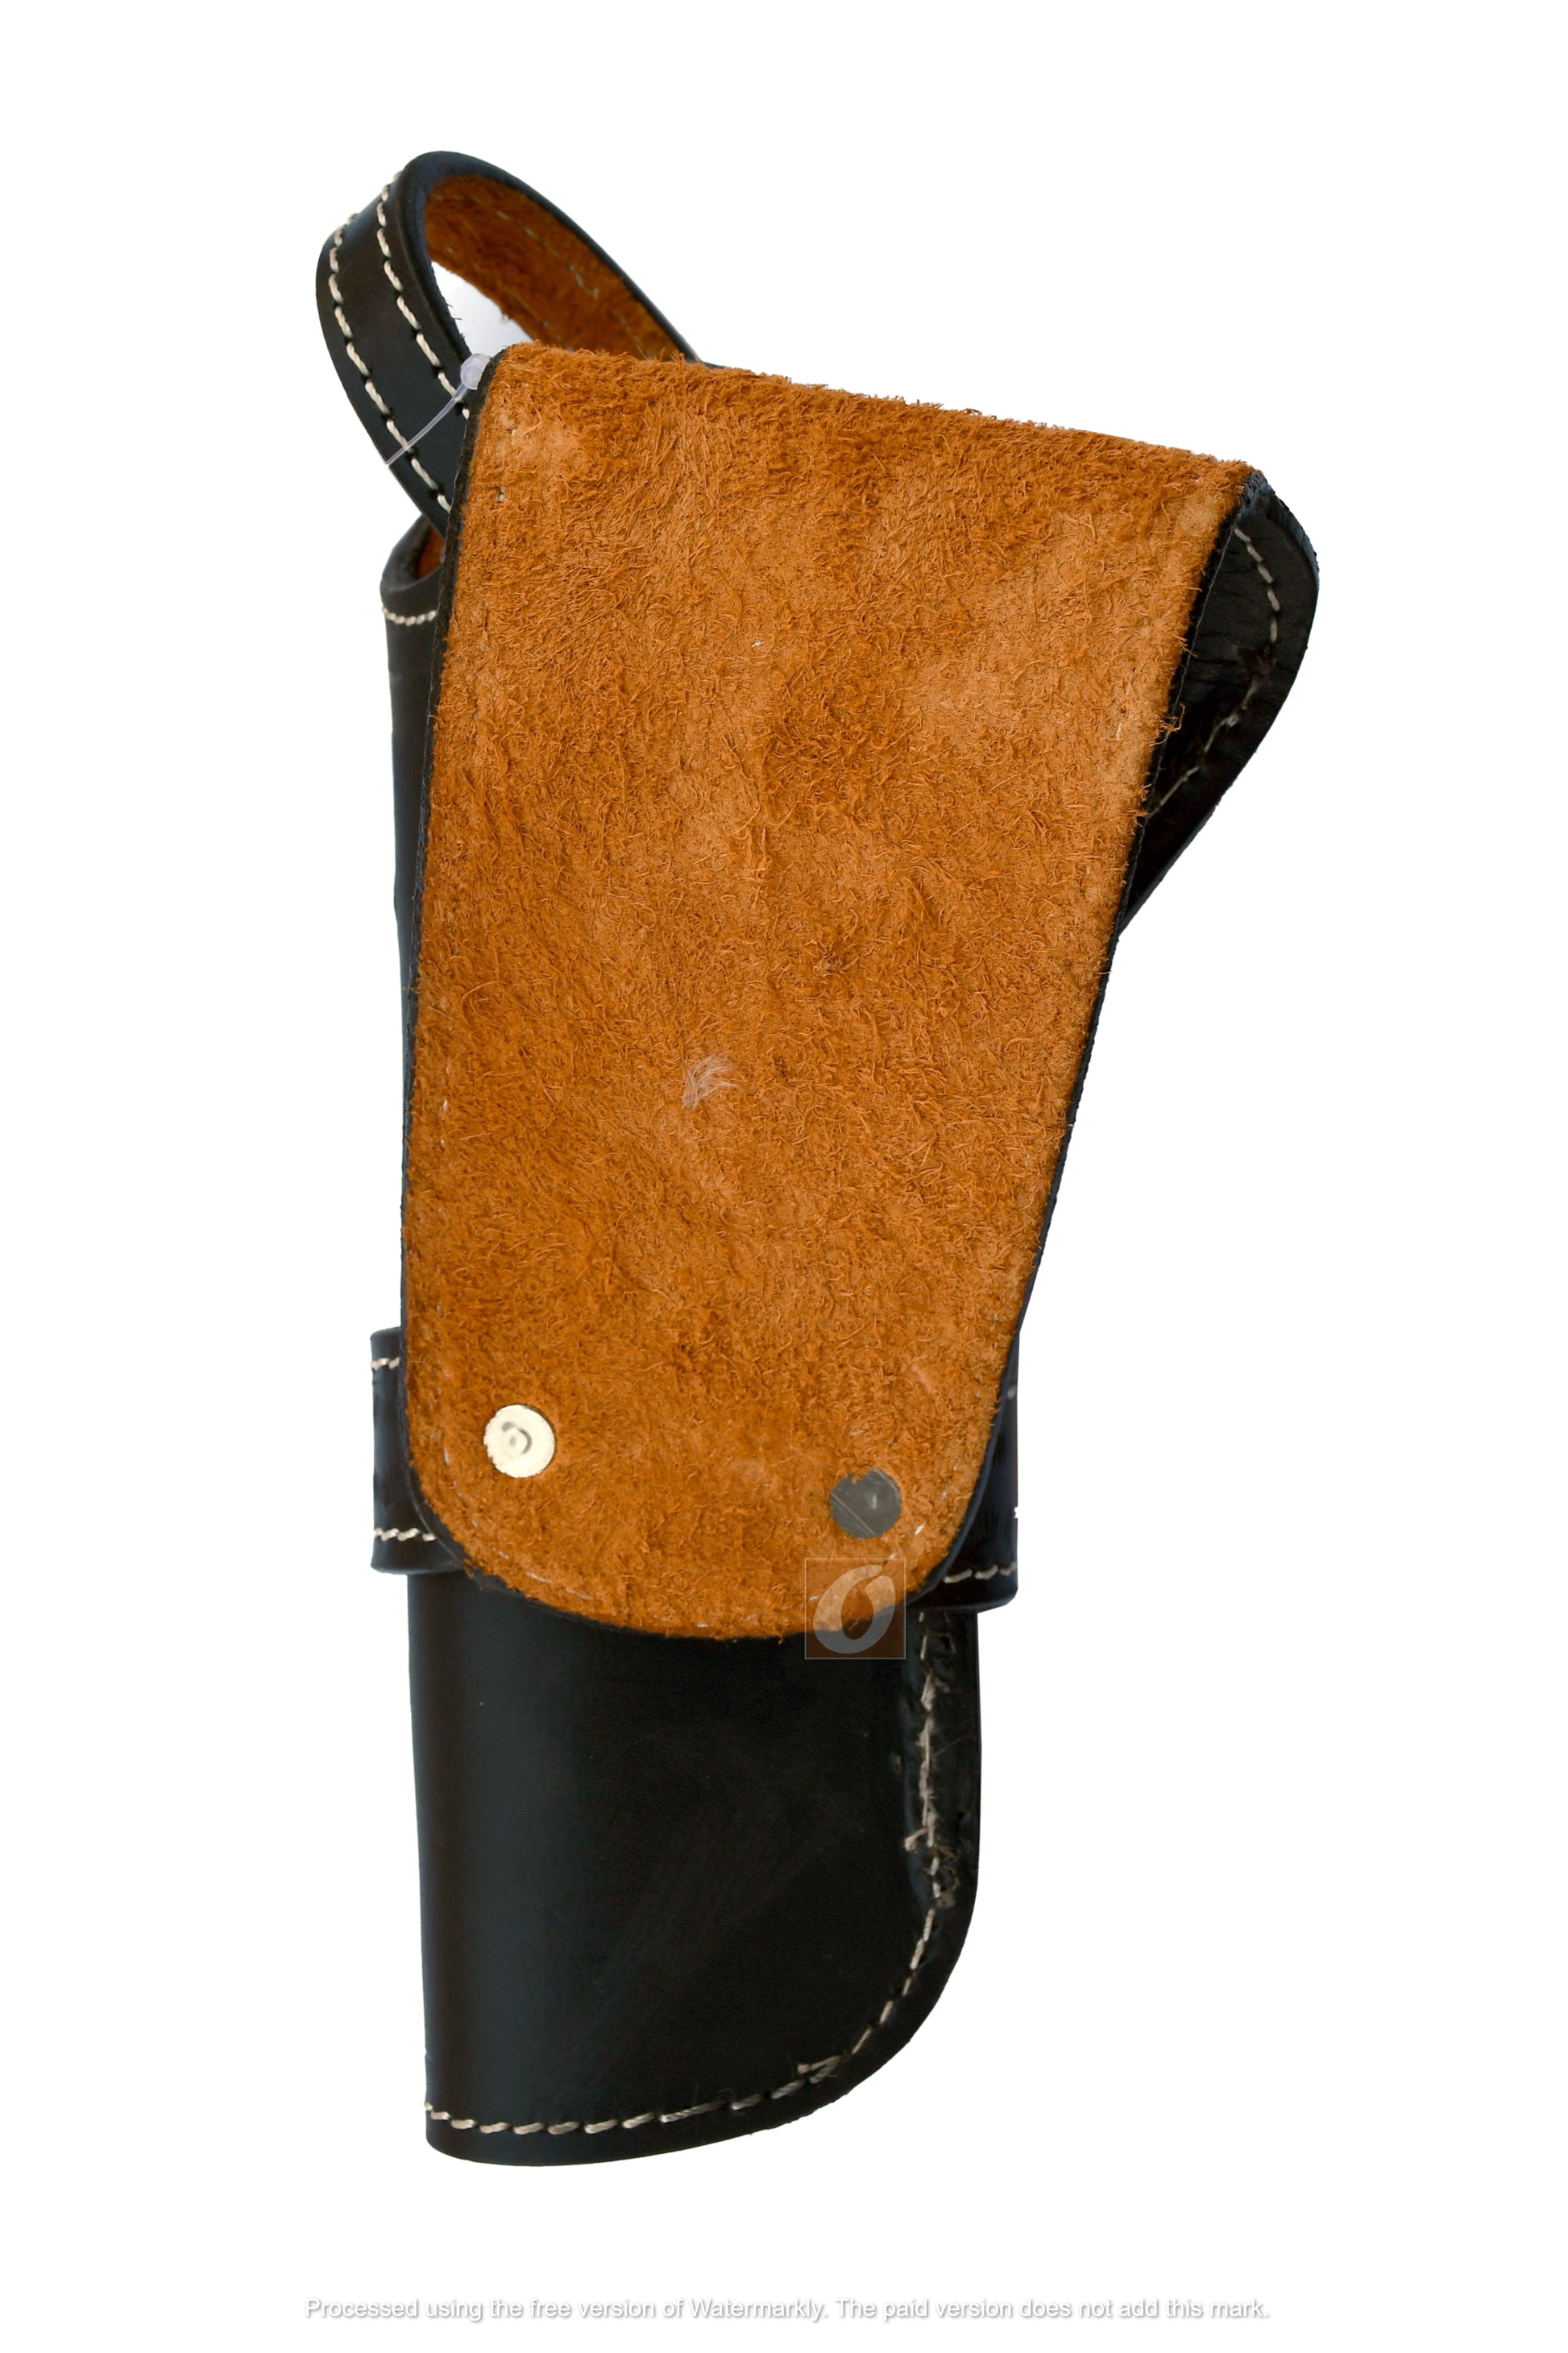 glock heritage smith wesson ruger leather western holster